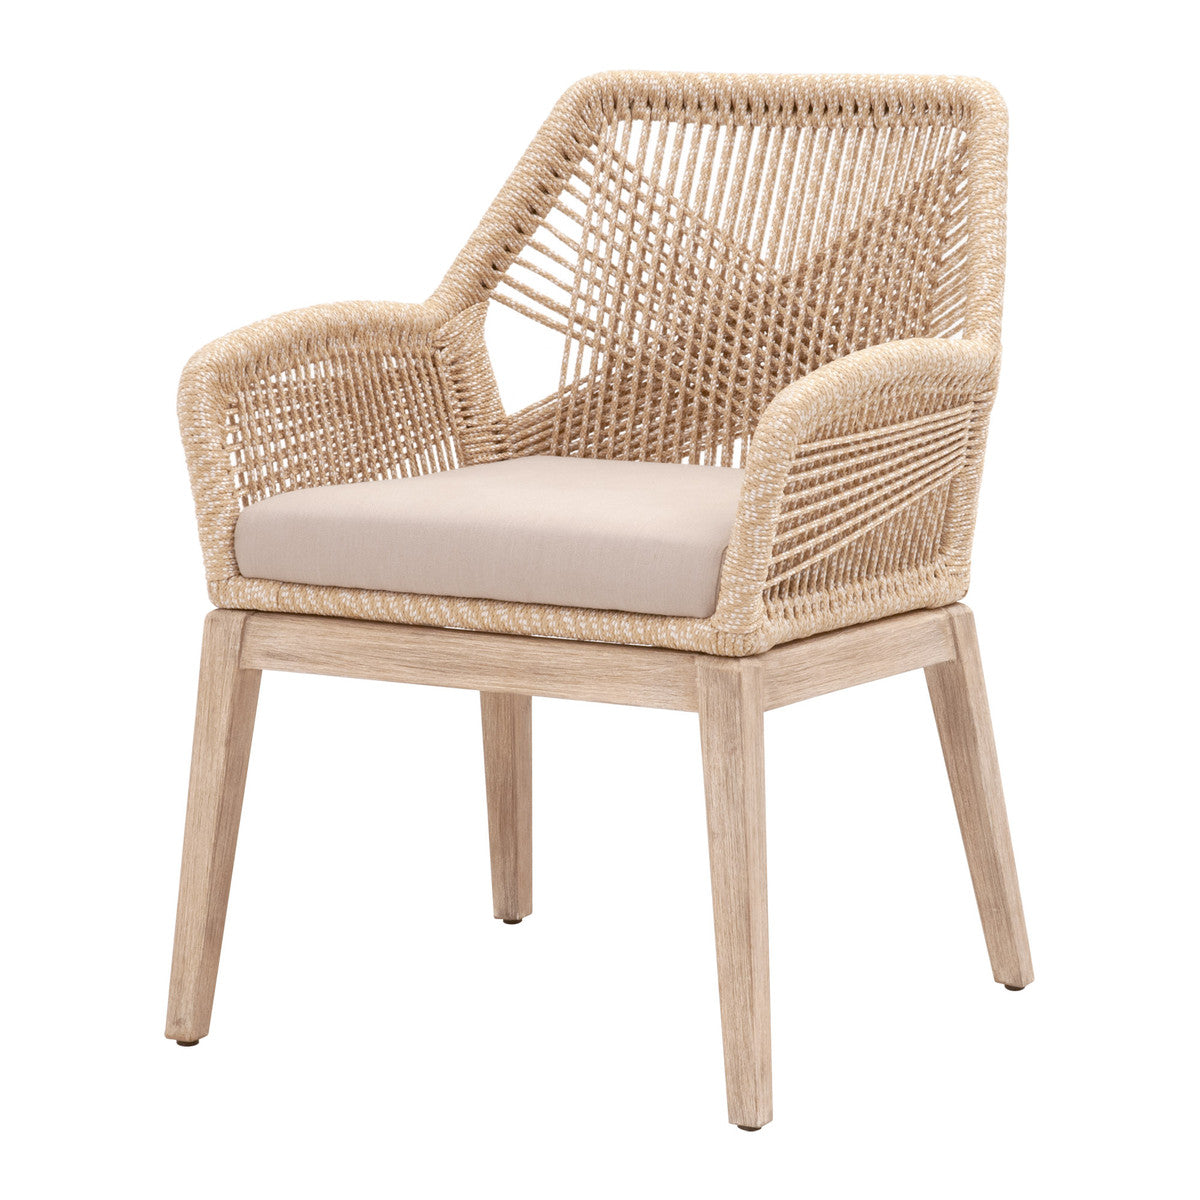 Lilian Dining Chair - Set of 2 - Sand